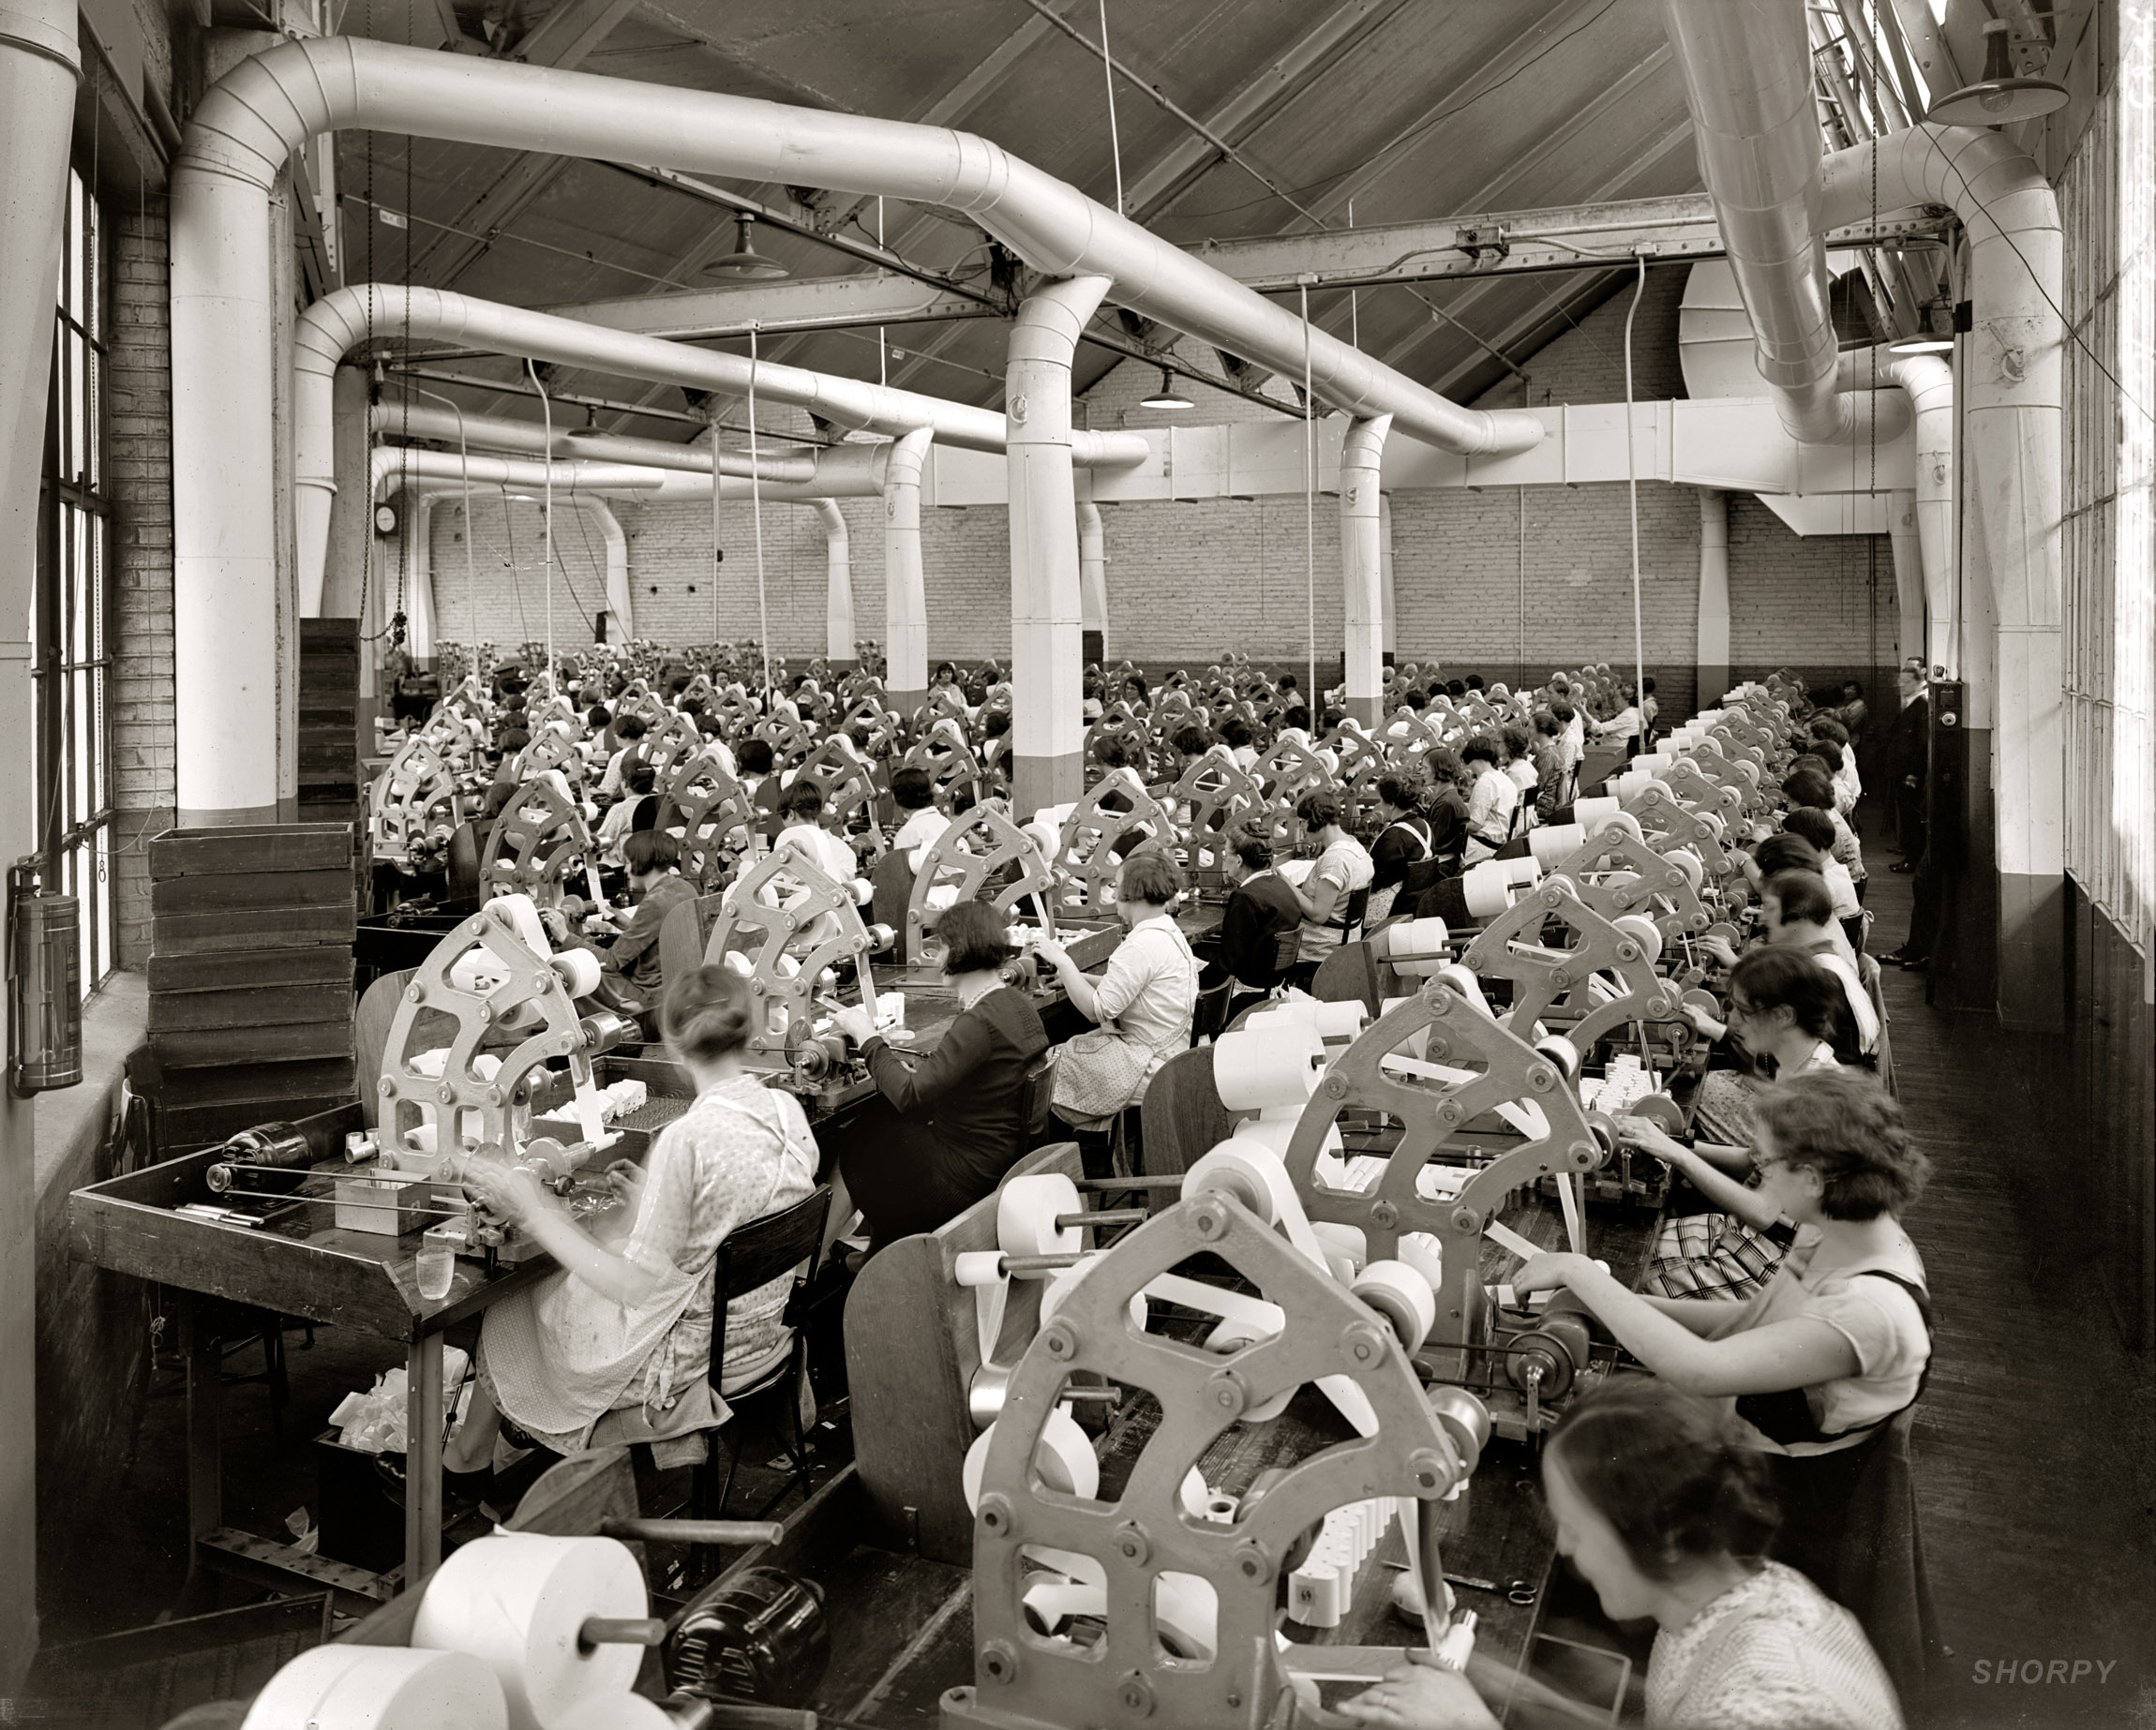 Circa 1925, another scene from the Atwater Kent radio factory in Philadelphia. National Photo Company Collection glass negative. View full size.